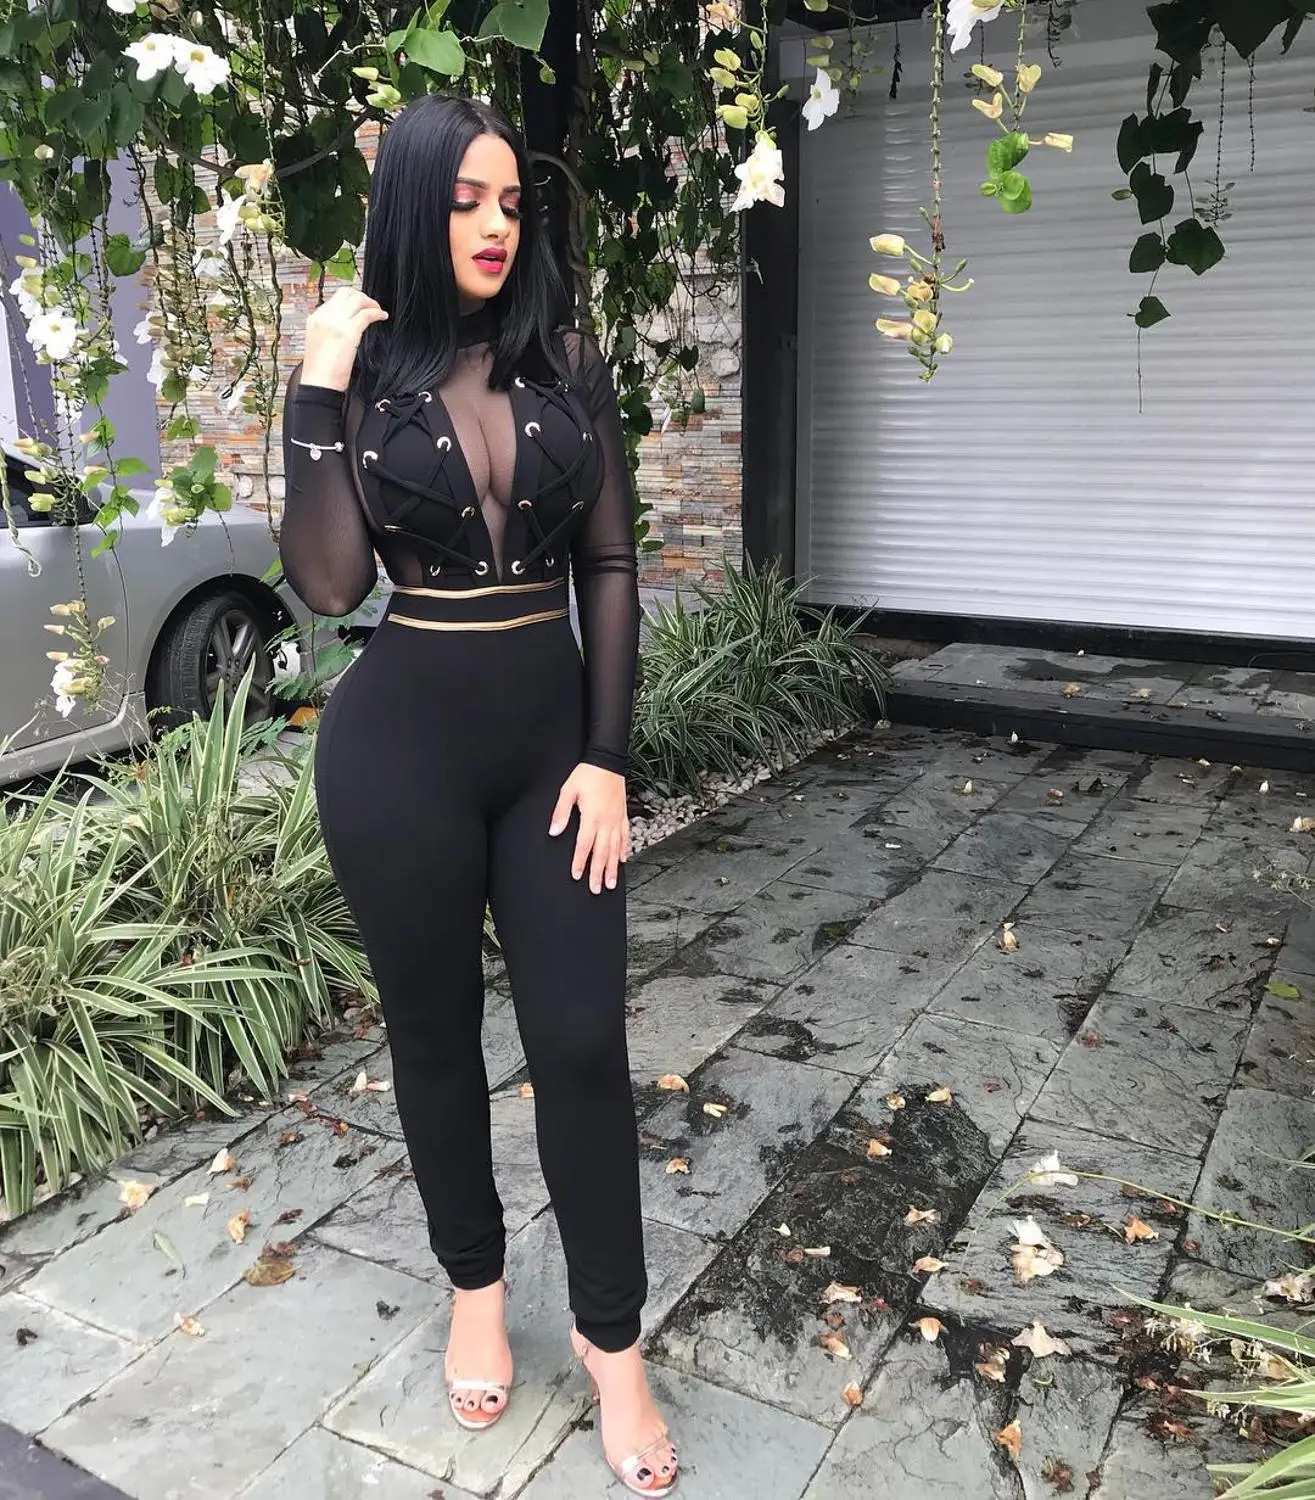 

2021 Black Women Sexy See Through Mesh Jumpsuit Long Sleeve Bandage Rompers Female Splice Overalls Bodycon Nightclub Playsuit